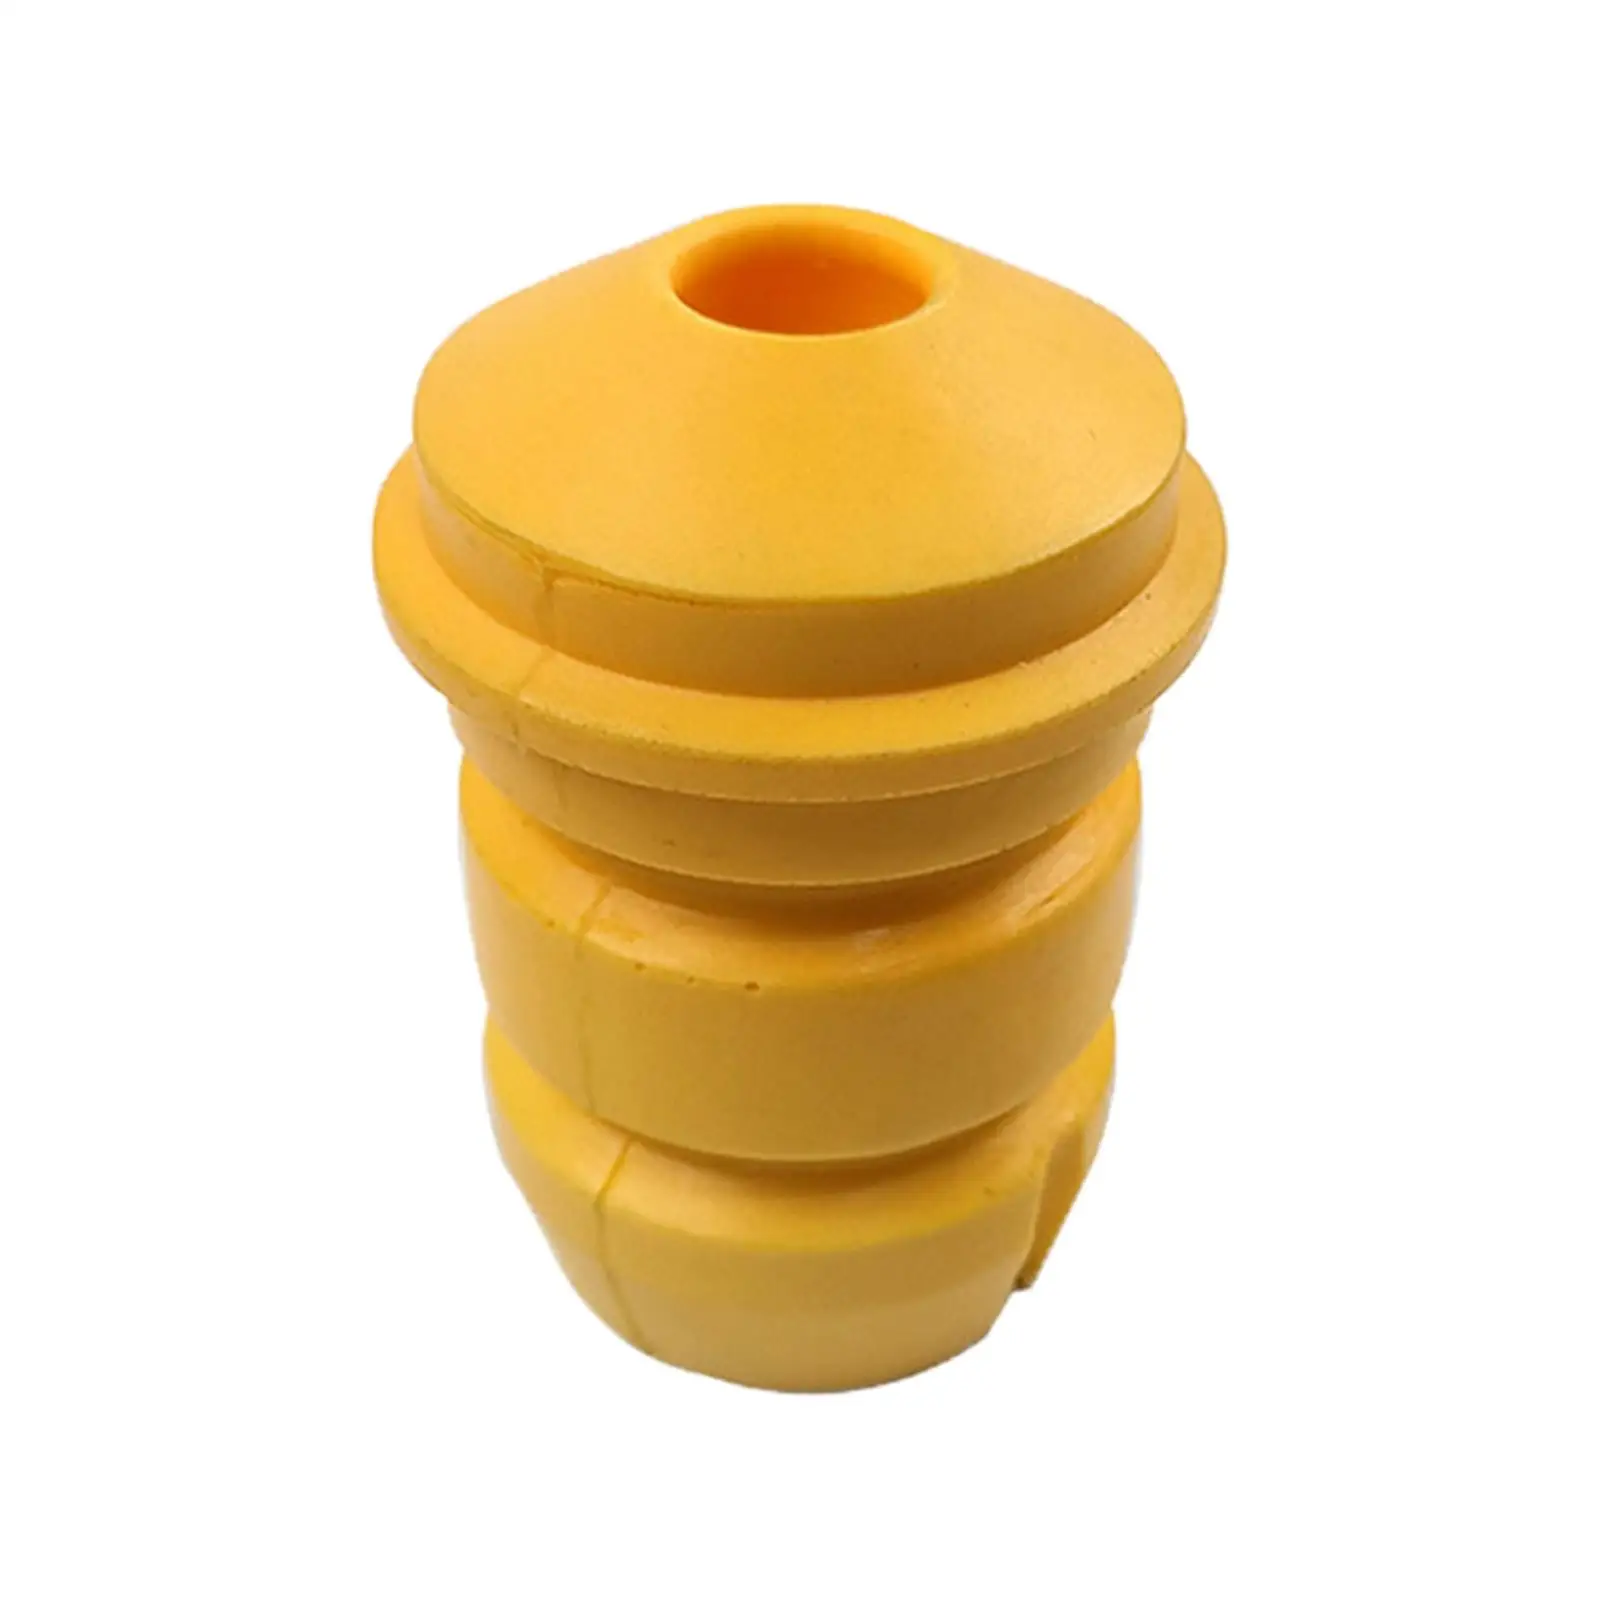 Automotive Bumper Impact Cushion Buffer Shock Absorber Sturdy 33531135624 for